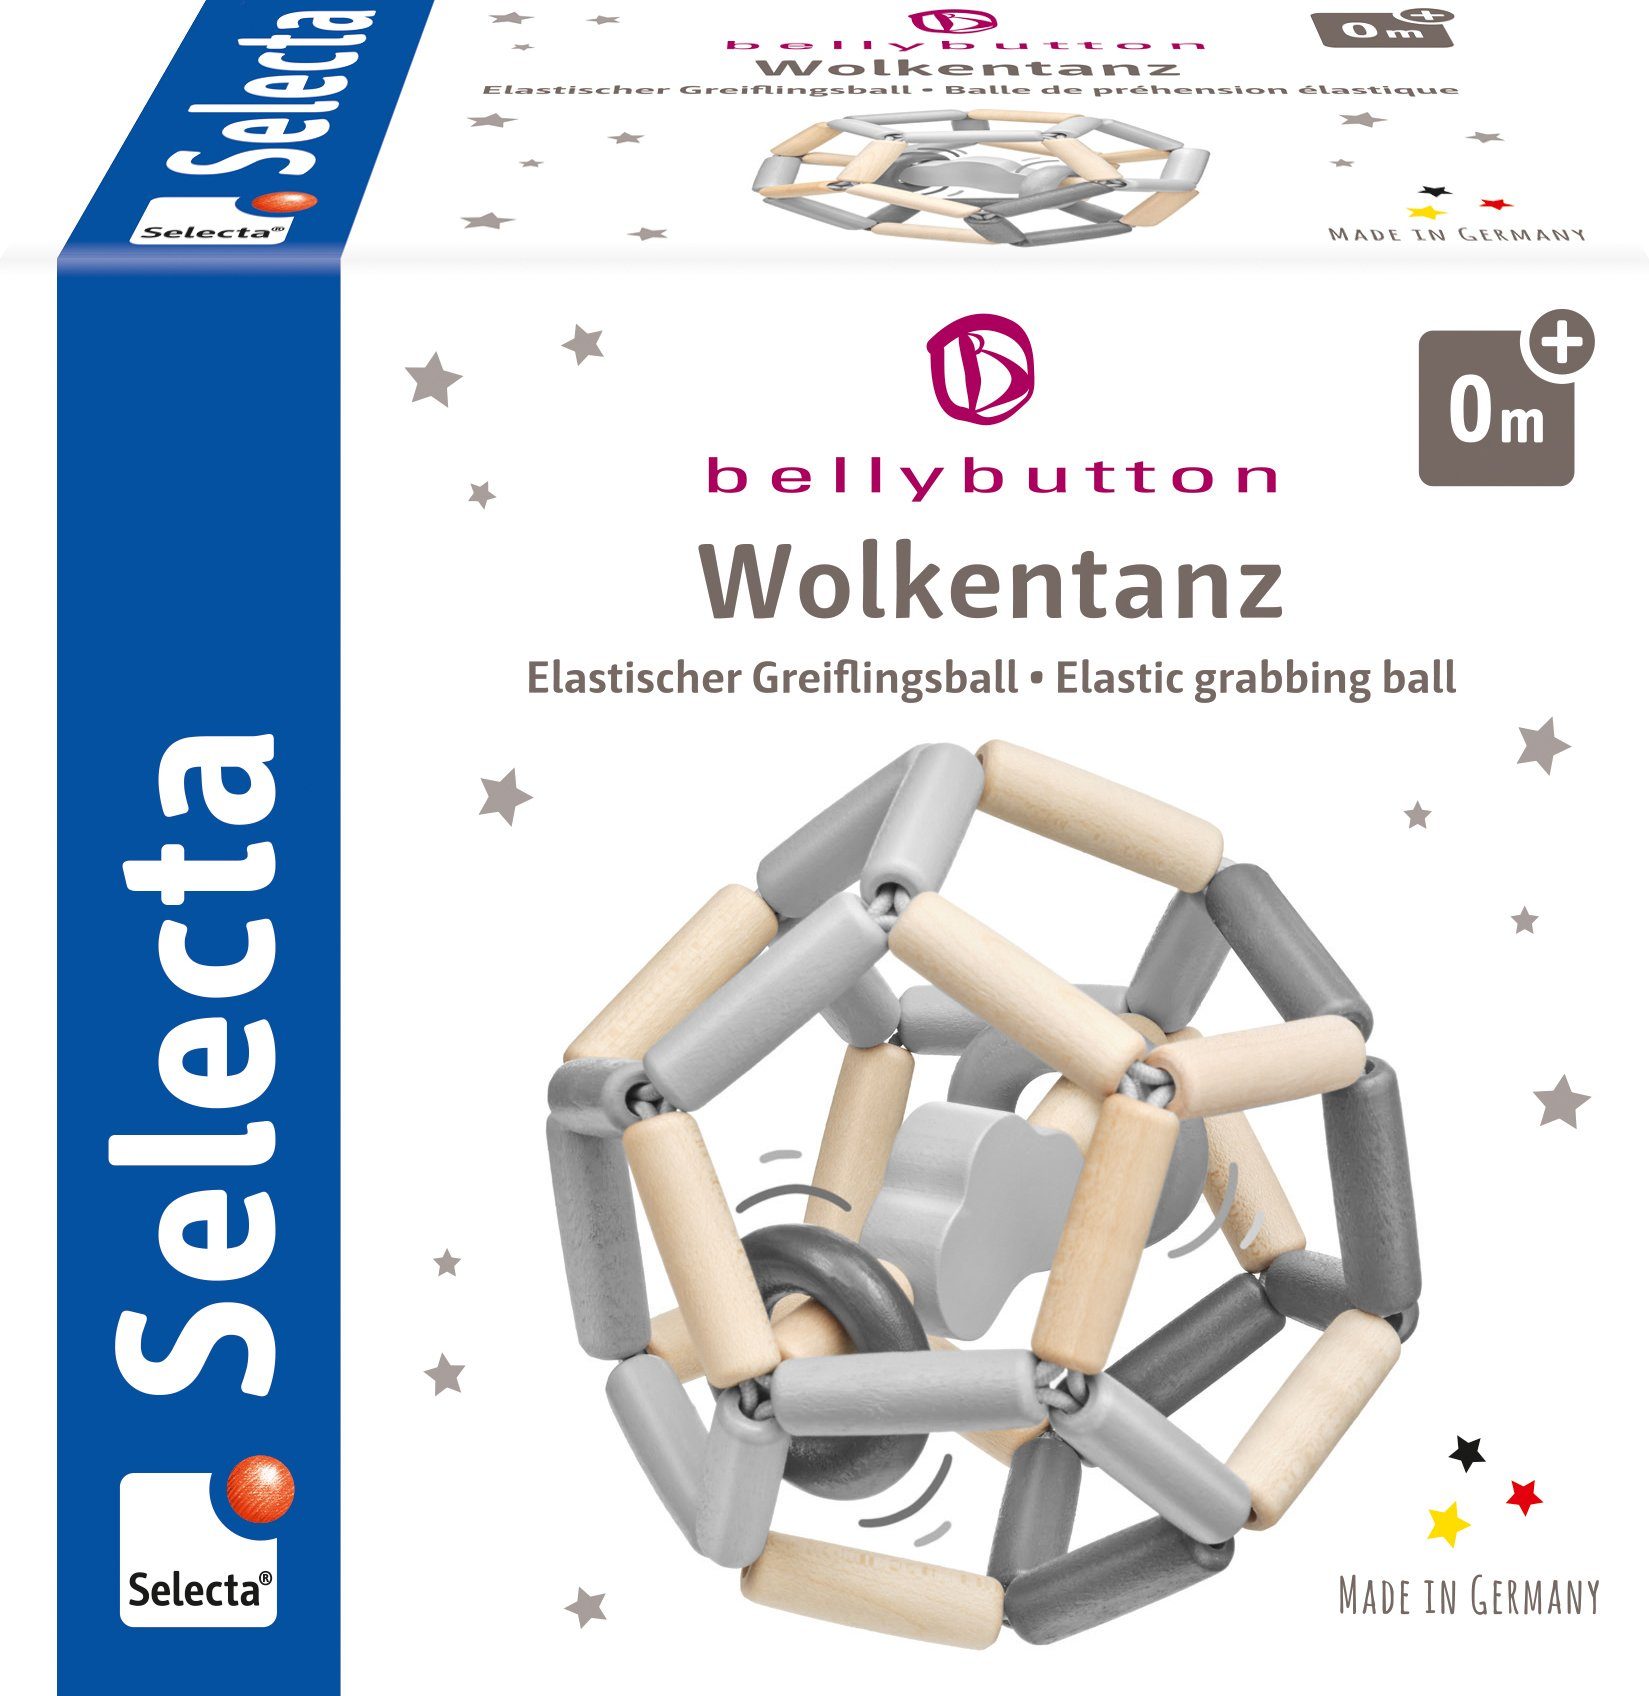 Selecta Greifspielzeug bellybutton by Selecta, Made in Wolkentanz, Greiflingball Germany